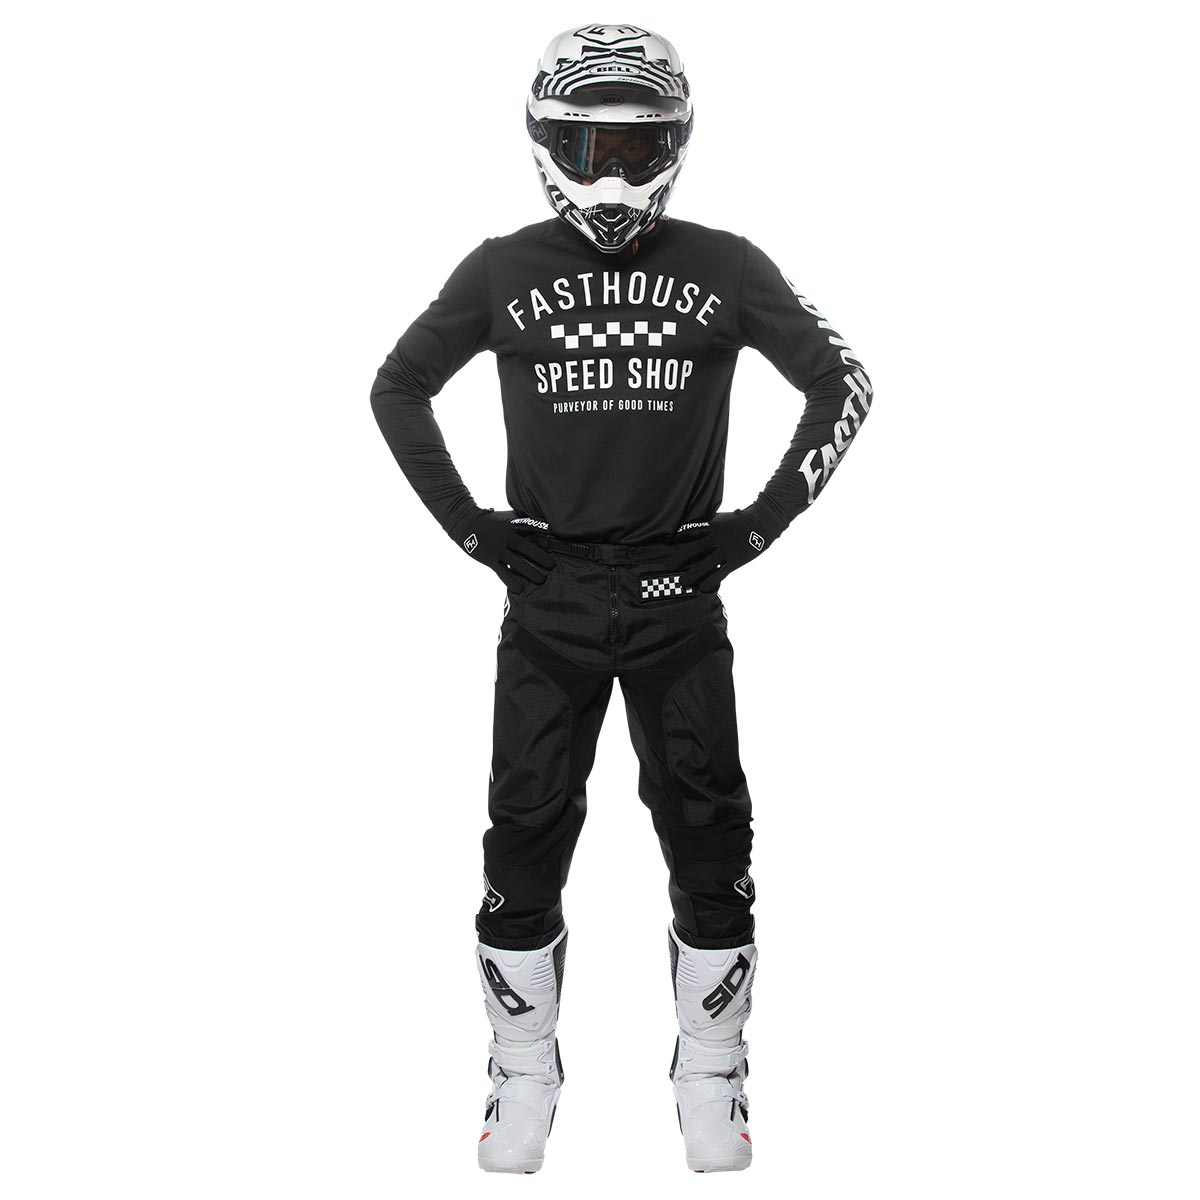 Fasthouse Carbon Jersey and Pants - Black